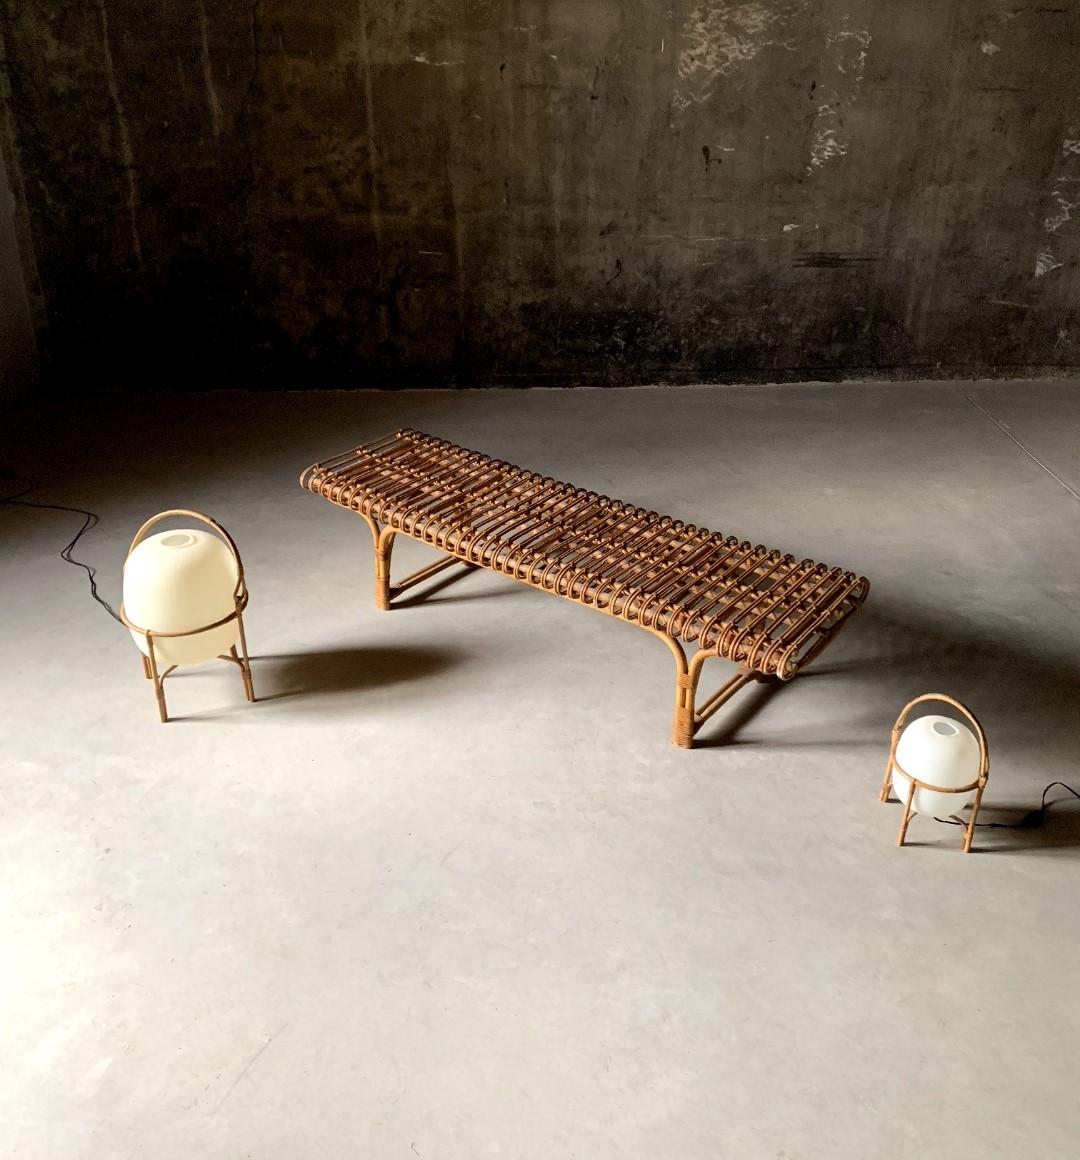 Spanish Rarest and Documented Rattan Bench by Joaquim Belsa, Spain, 1962